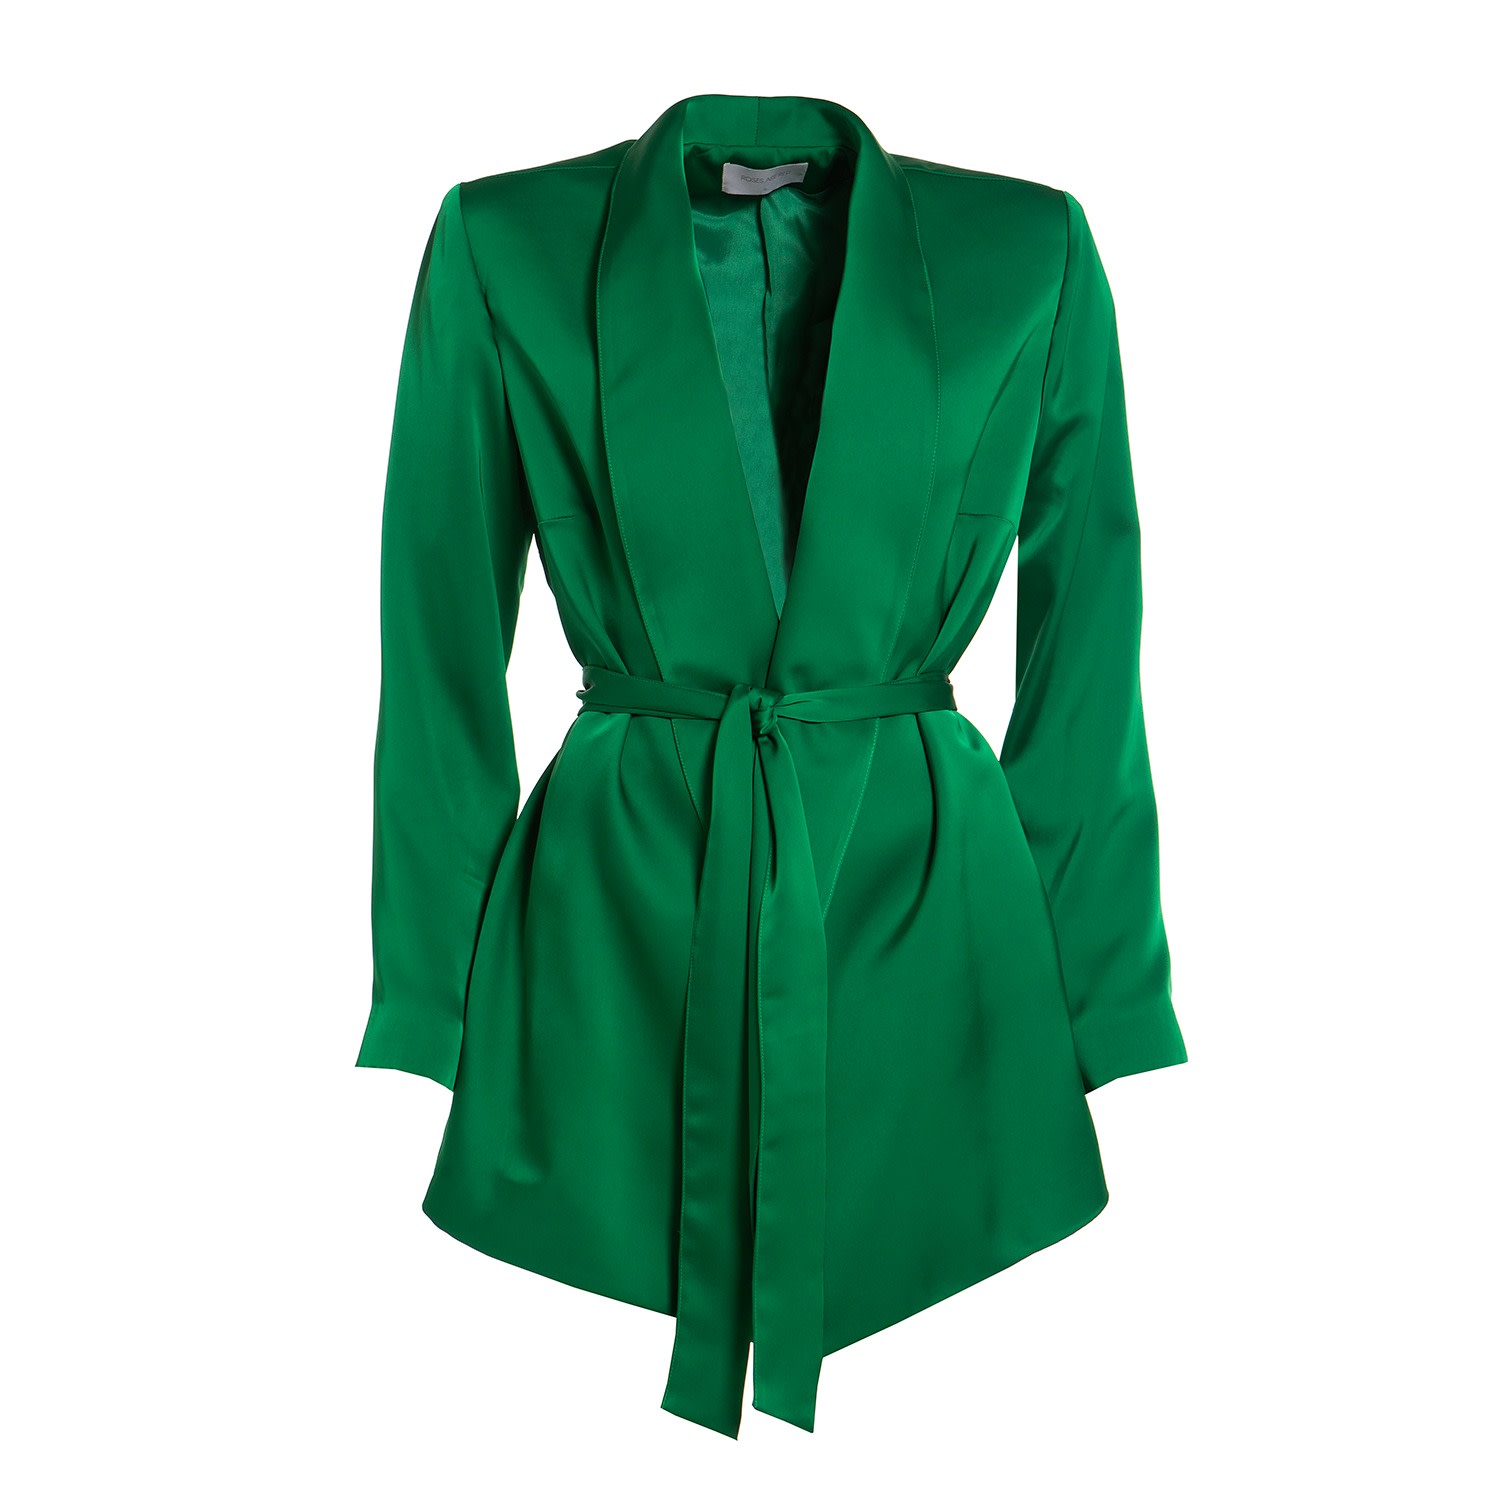 Women’s The Suit Blazer In Emerald Green Medium Roses are Red